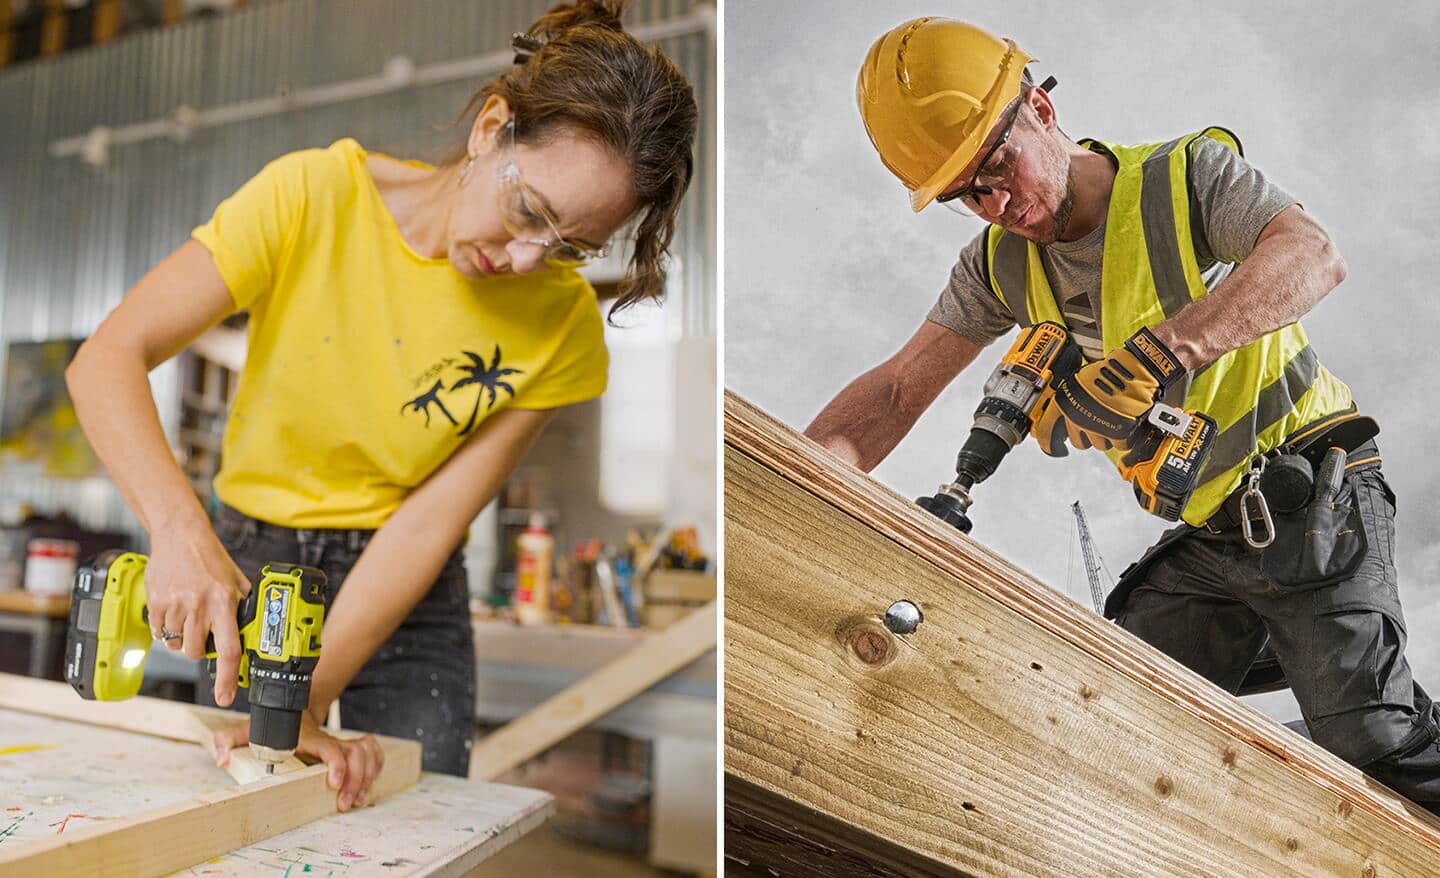 A side by side image of a woman using a light duty drill next to a man on a construction site using a heavy duty drill.